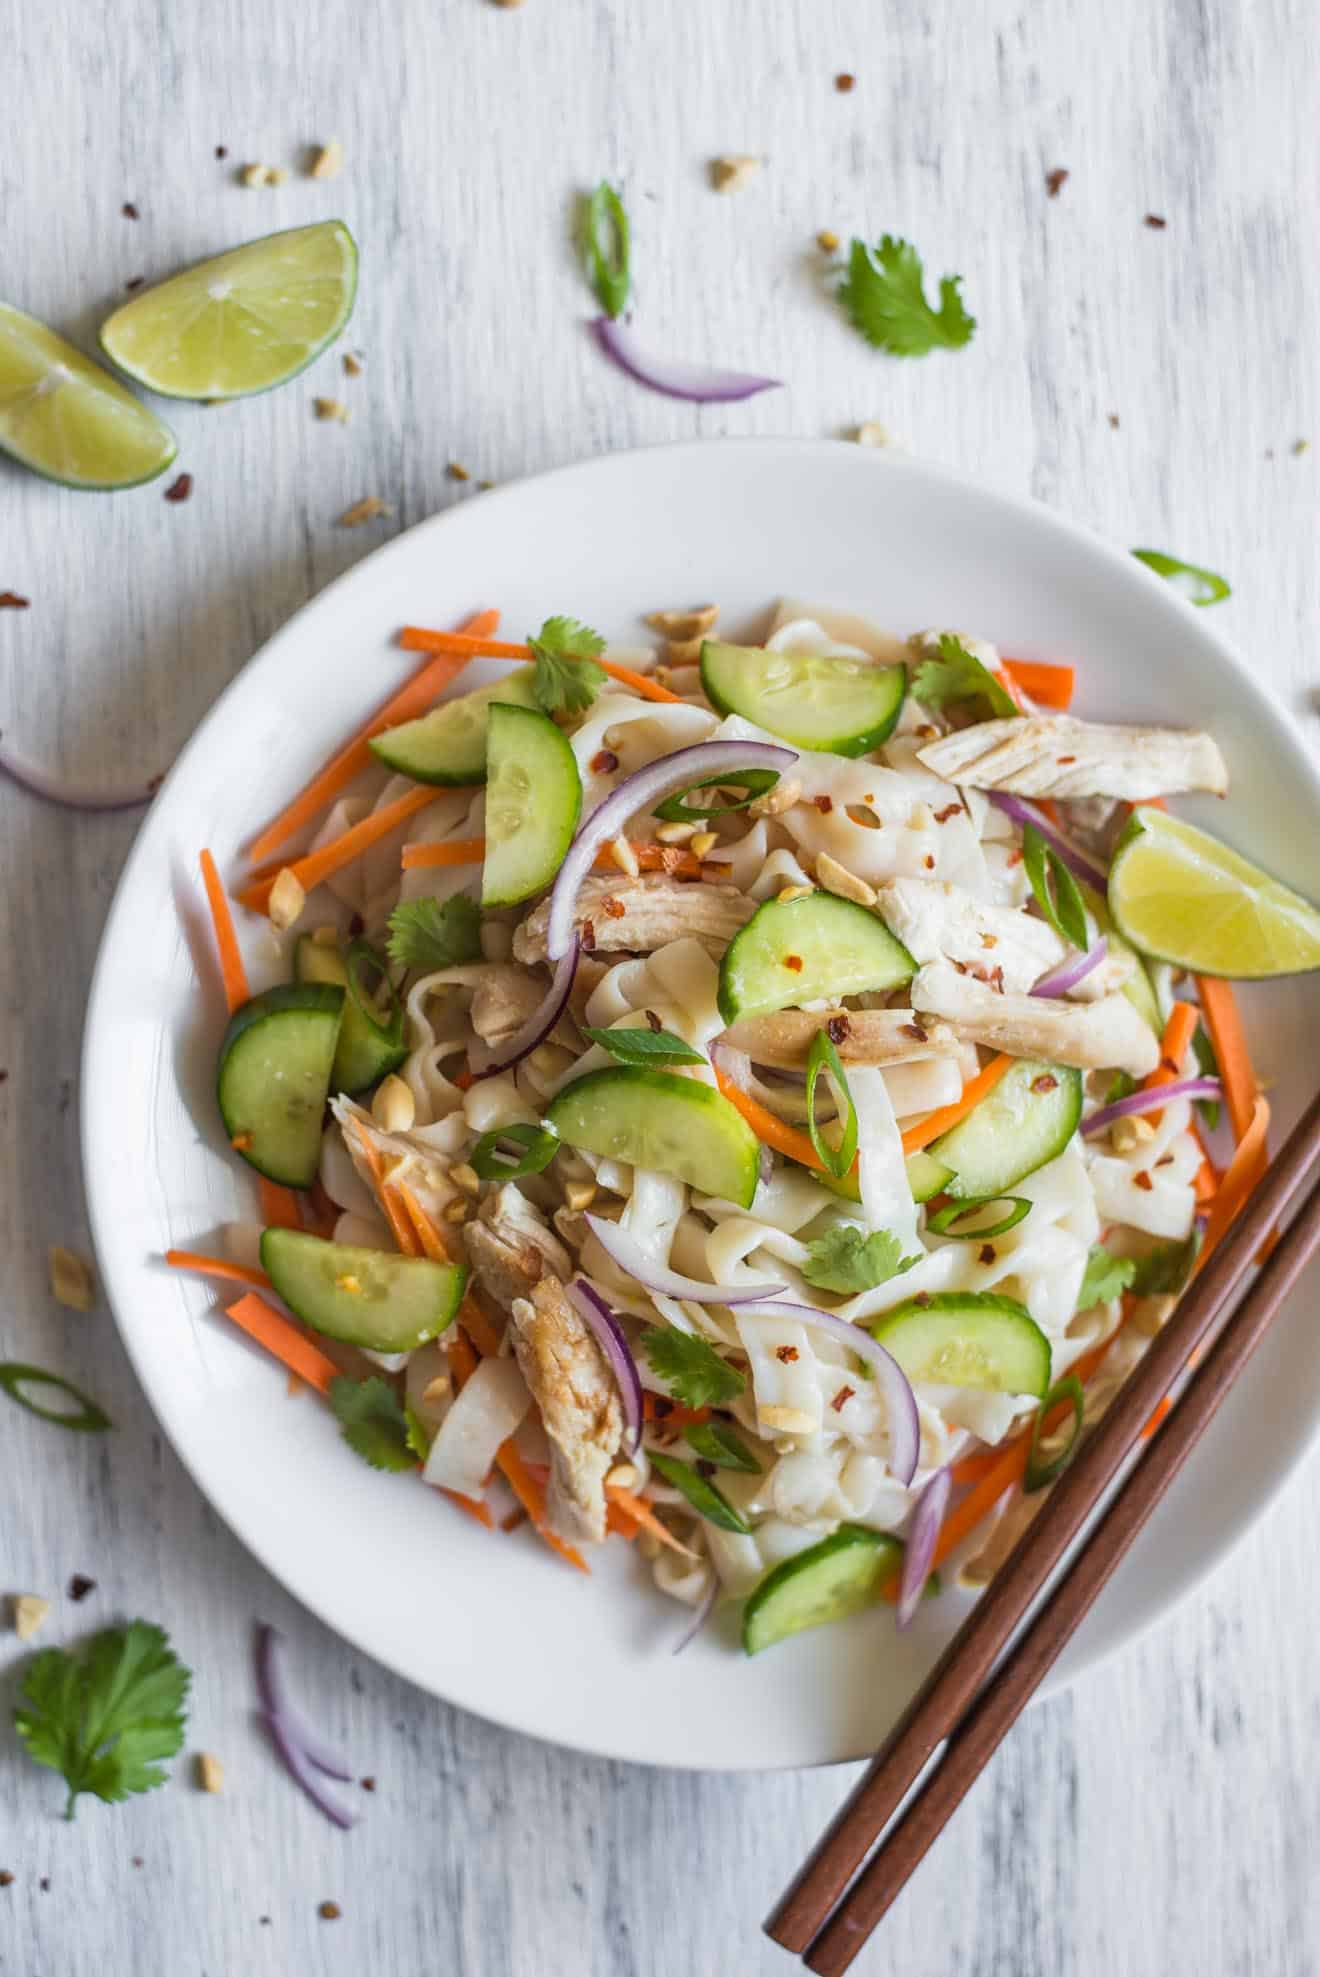 This tasty Lemongrass Chicken Noodle Salad is the perfect low-carb, gluten-free dinner. It's light, healthy and packed with vegetables. by @healthynibs